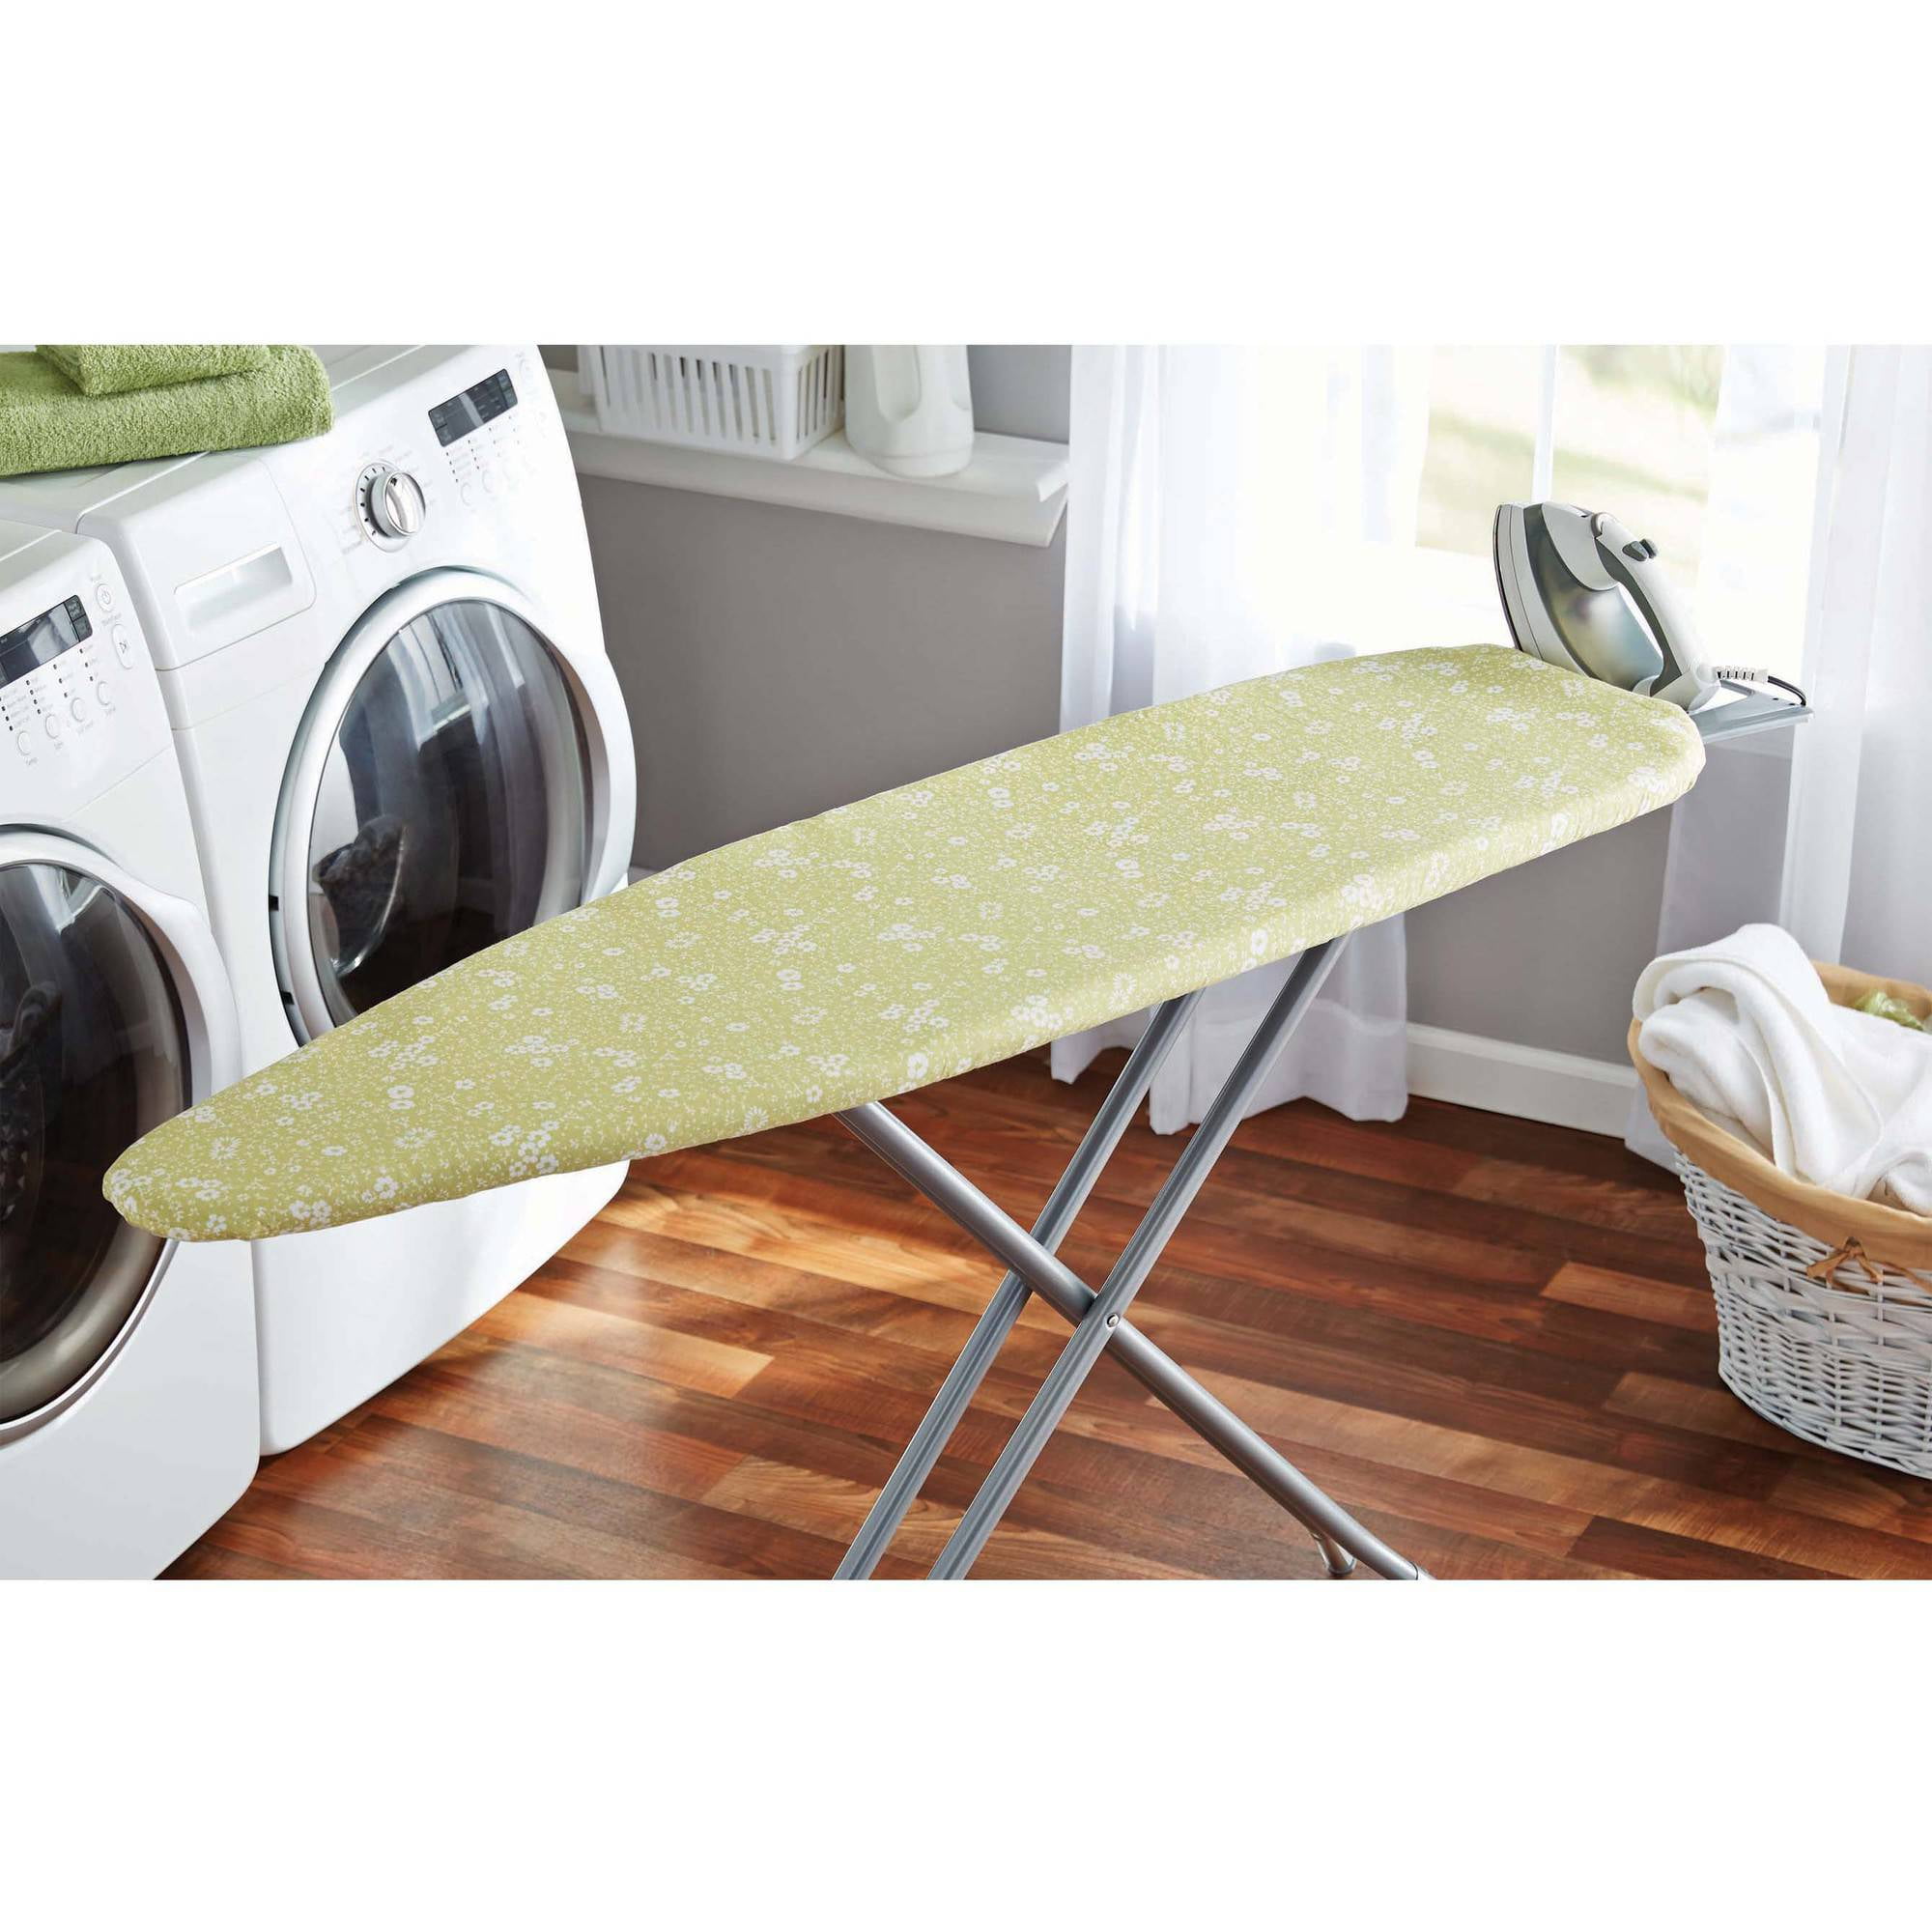 Mainstays Ironing Board Cover & Pad Fits standard board 15" x 54" Navy White Dot 